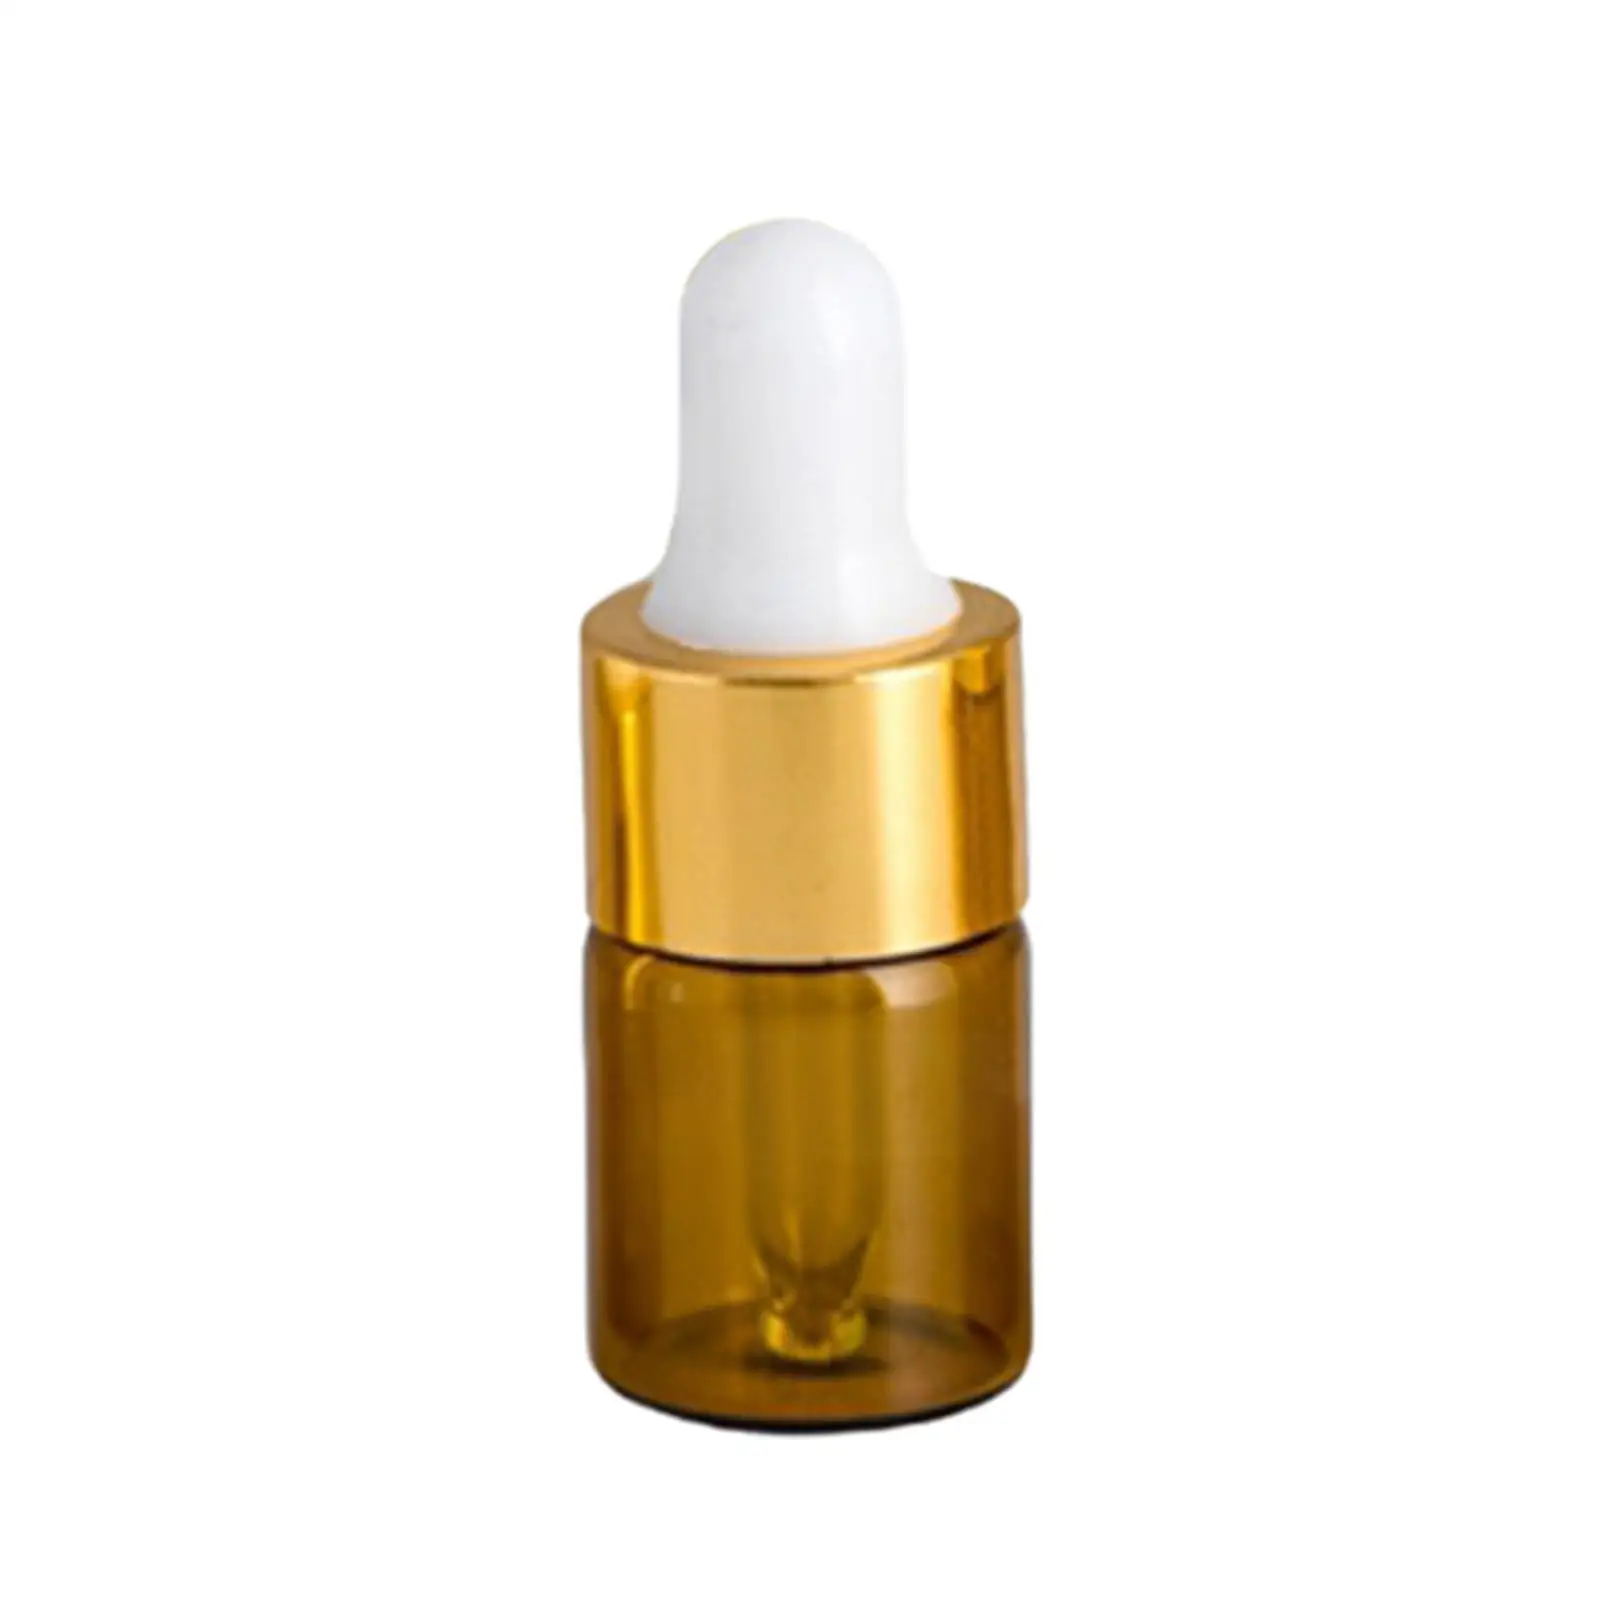 

2/3 Small Dropper Bottles with Glass Eye Dropper Sample Vial for Essential Oils Black 1ml